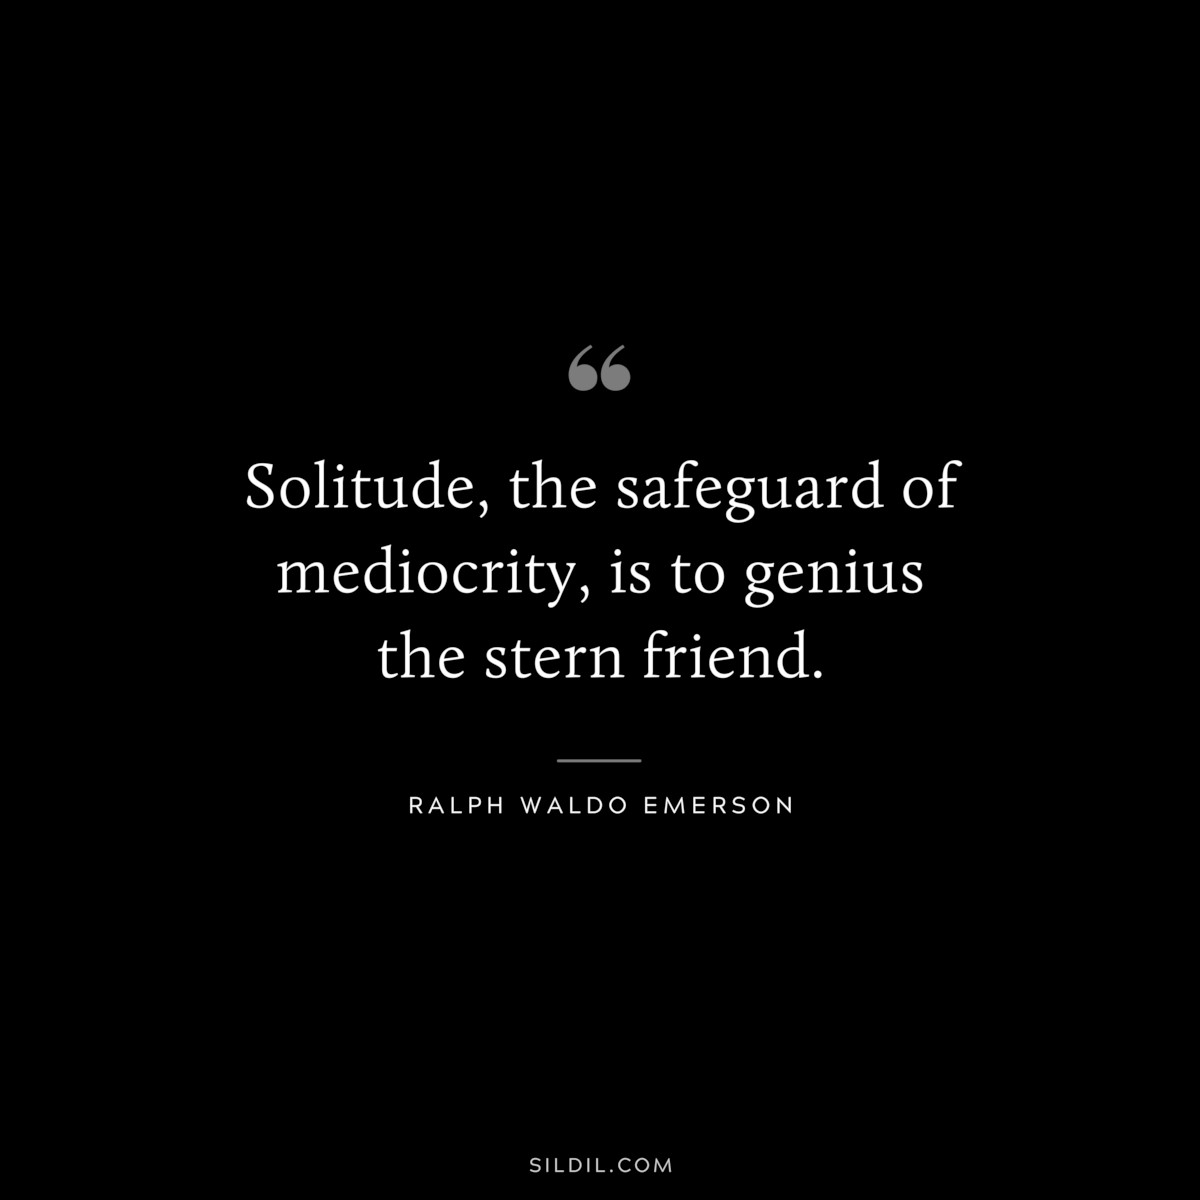 Solitude, the safeguard of mediocrity, is to genius the stern friend. — Ralph Waldo Emerson